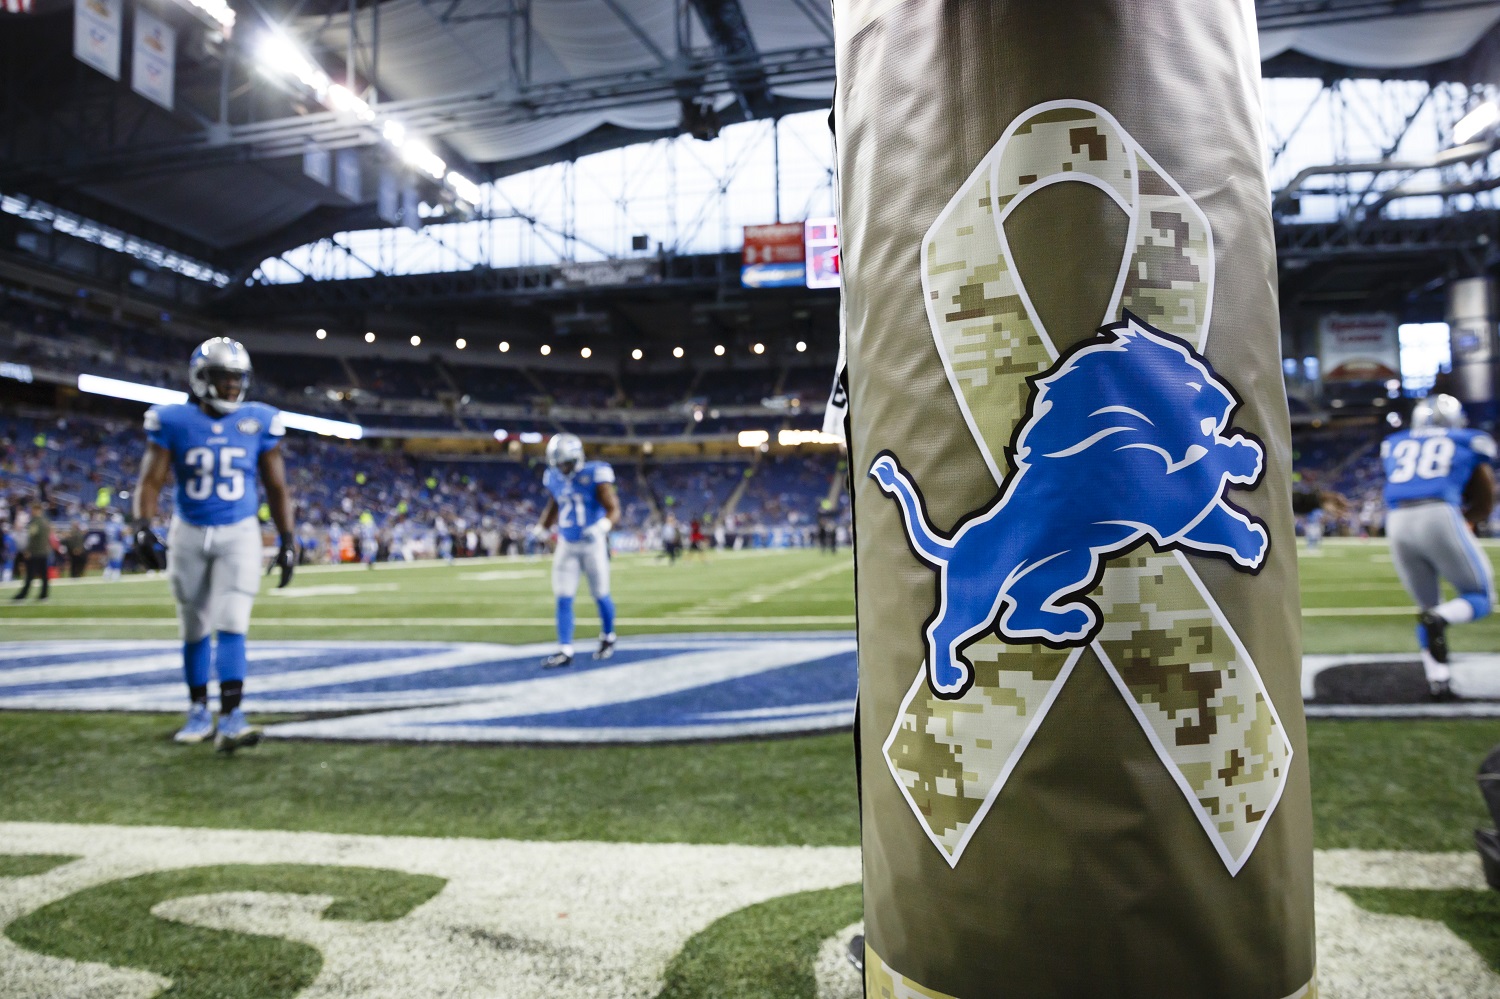 Salute to Service logo is seen on the goal post pad during warms up prior to an NFL football game between the Detroit Lions and the Oakland Raiders at Ford Field in Detroit, Sunday, Nov. 22, 2015. (AP Photo/Rick Osentoski)